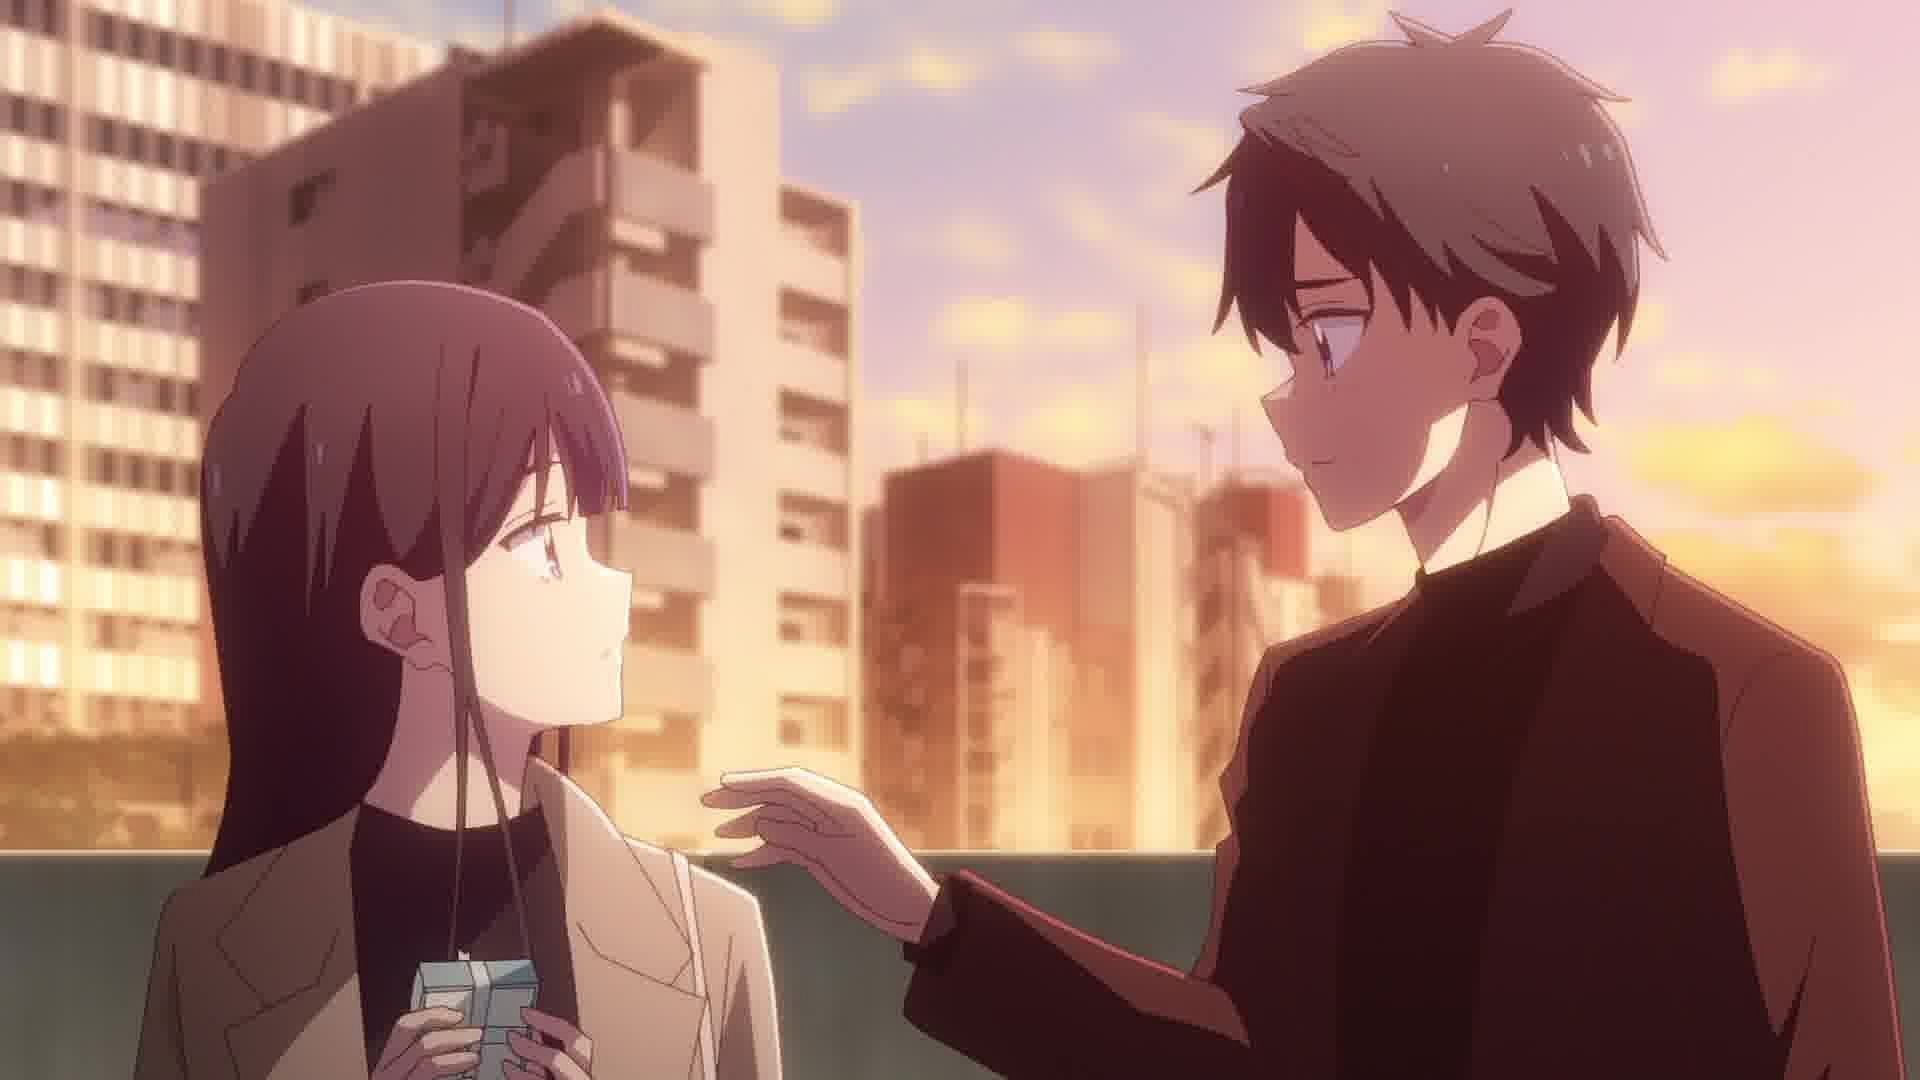 Masamune-kun Season 2 Episode 1 - A Couple From Japon in France